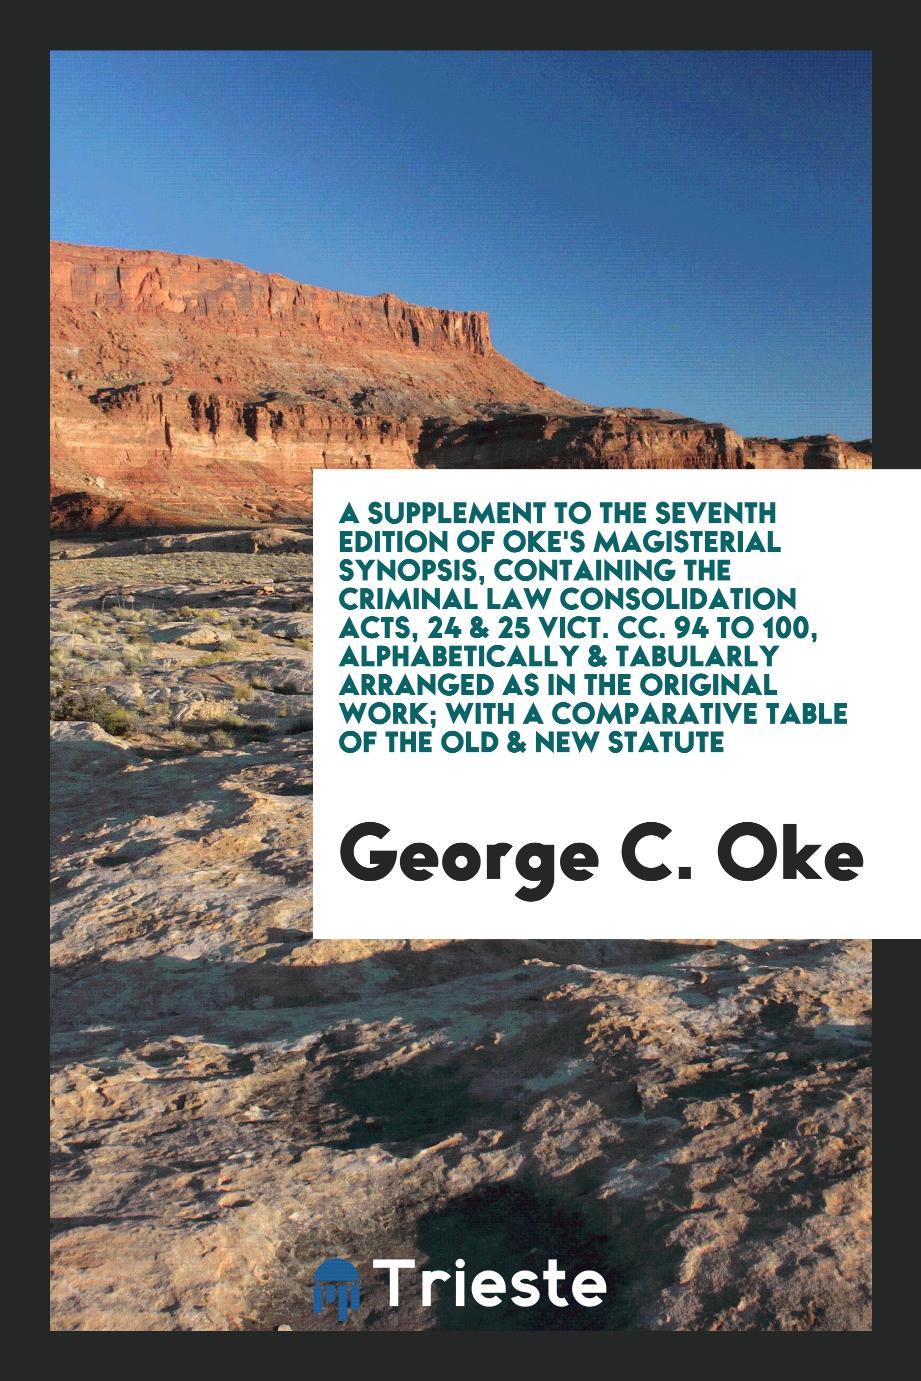 A Supplement to the Seventh Edition of Oke's Magisterial Synopsis, Containing the Criminal Law Consolidation Acts, 24 & 25 Vict. Cc. 94 to 100, Alphabetically & Tabularly Arranged as in the Original Work; With a Comparative Table of the Old & New Statute